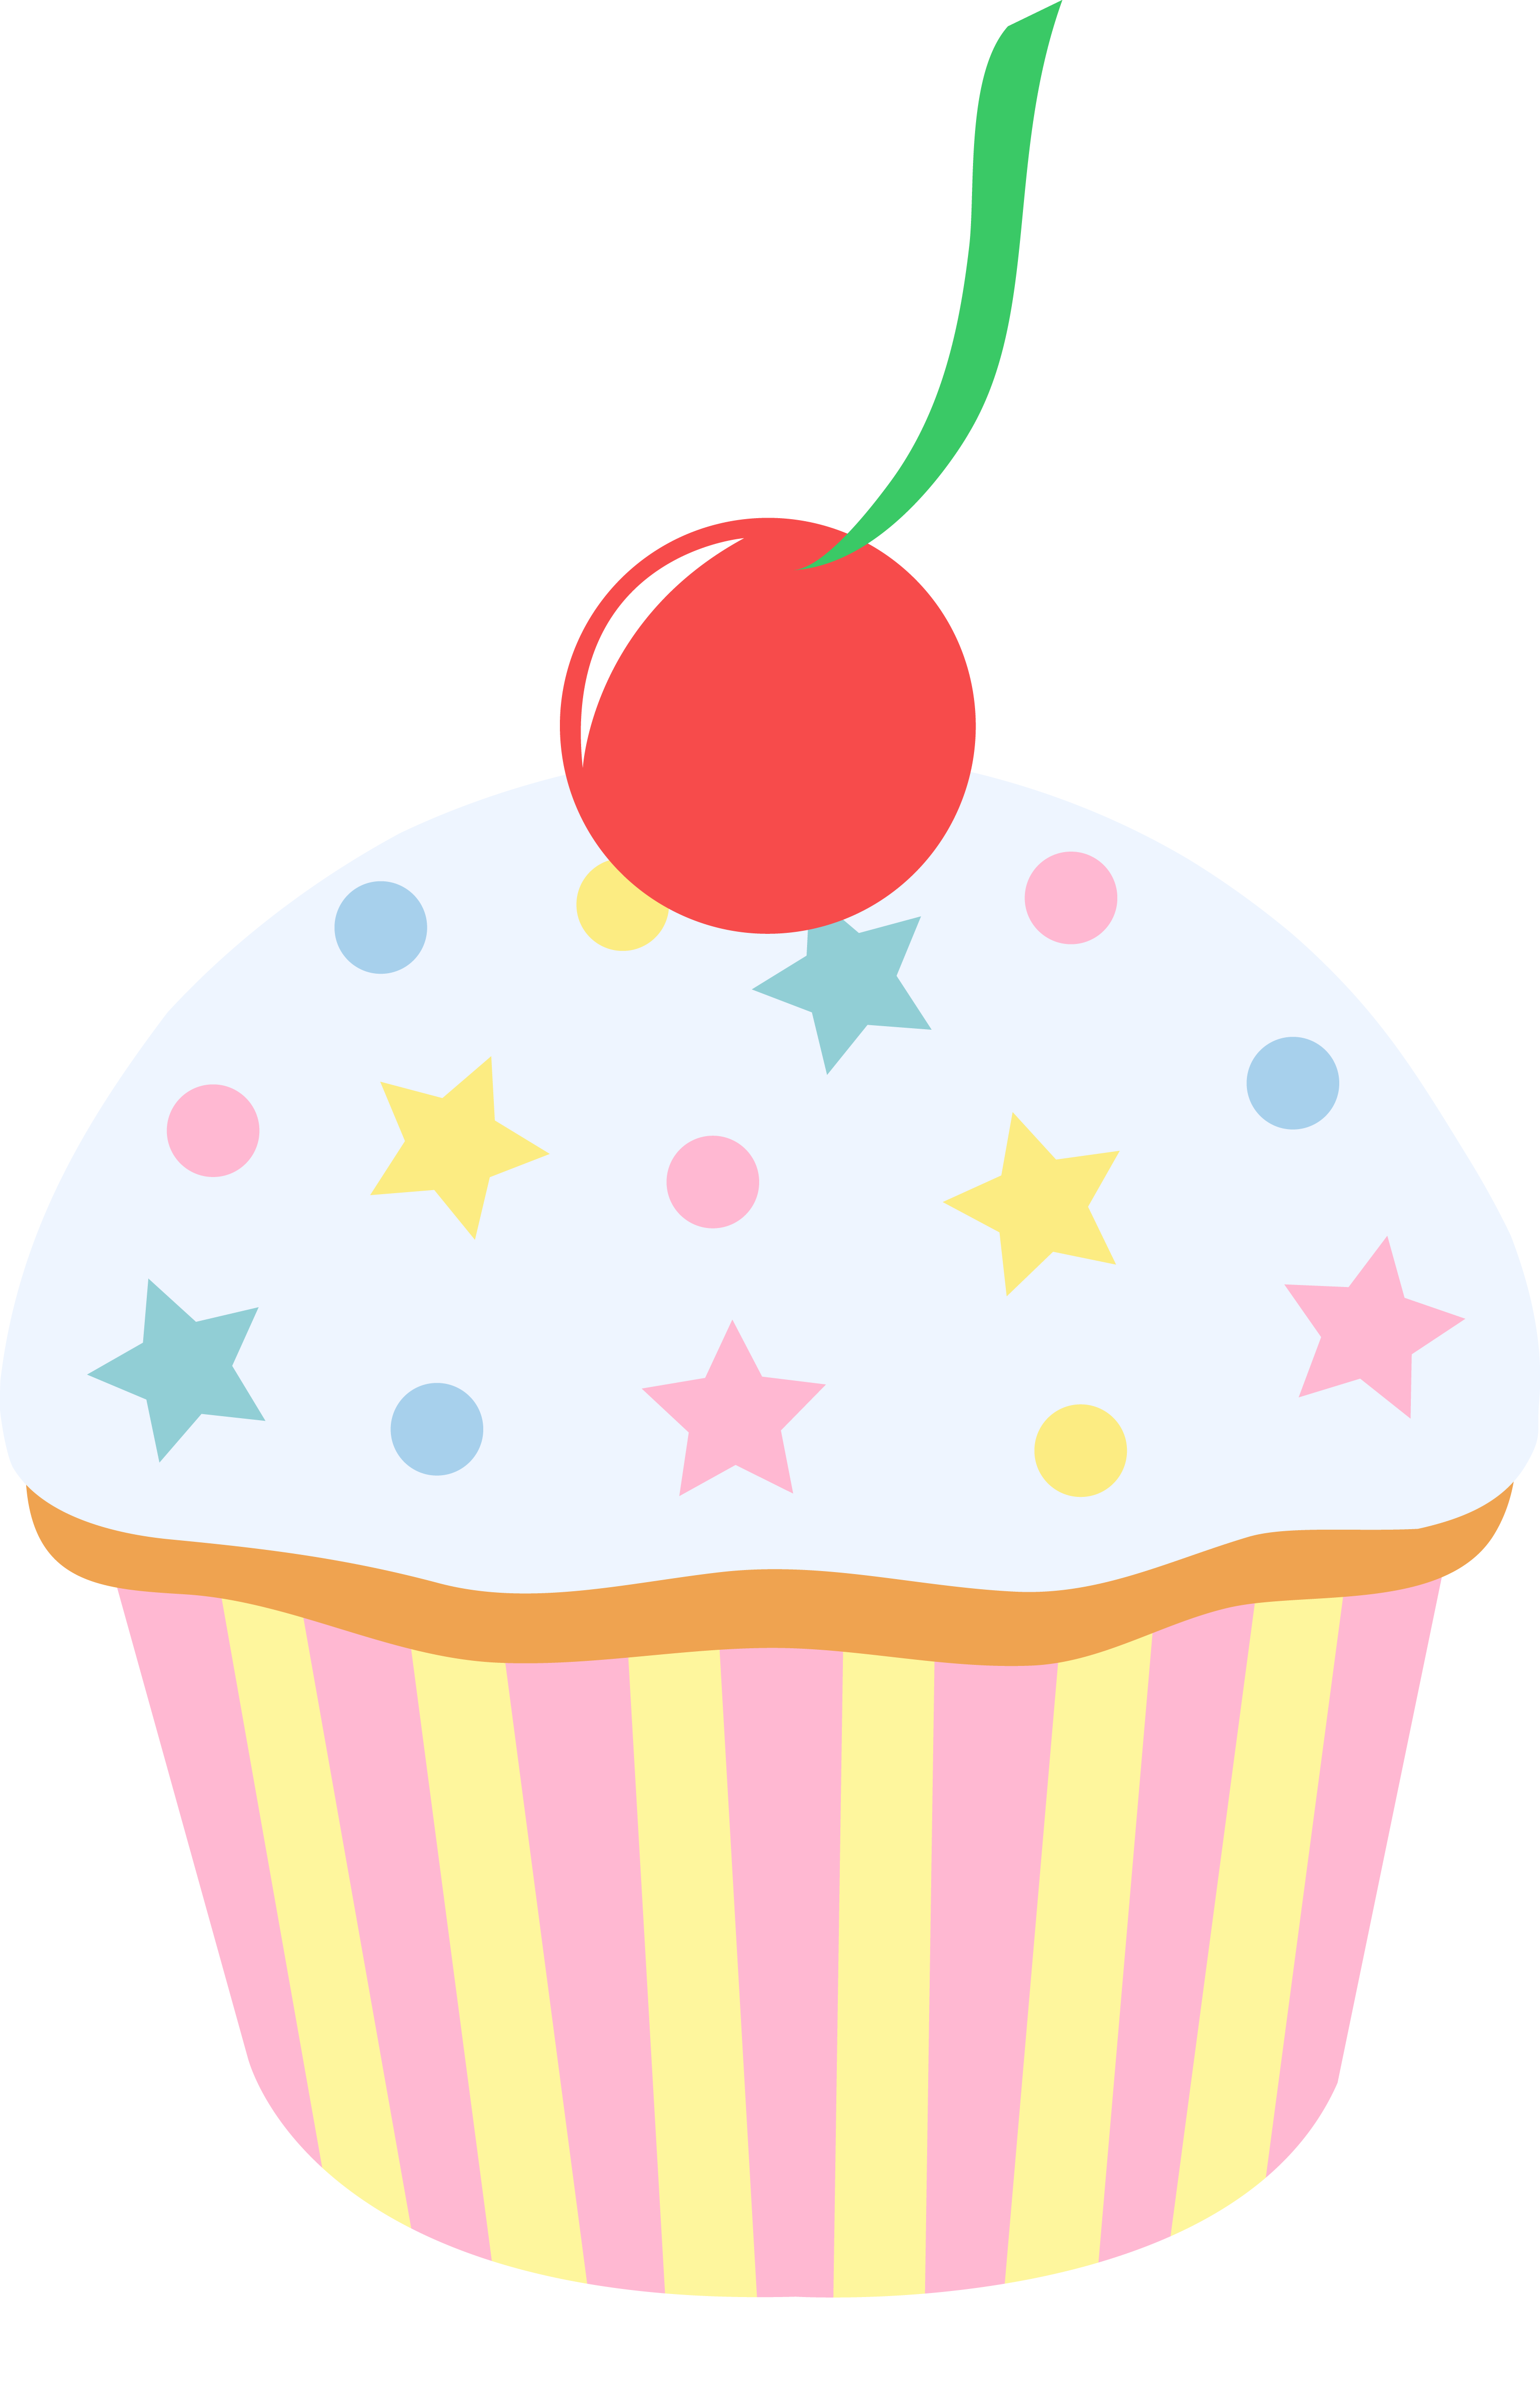 Image Of A Cupcake | Free Download Clip Art | Free Clip Art | on ...